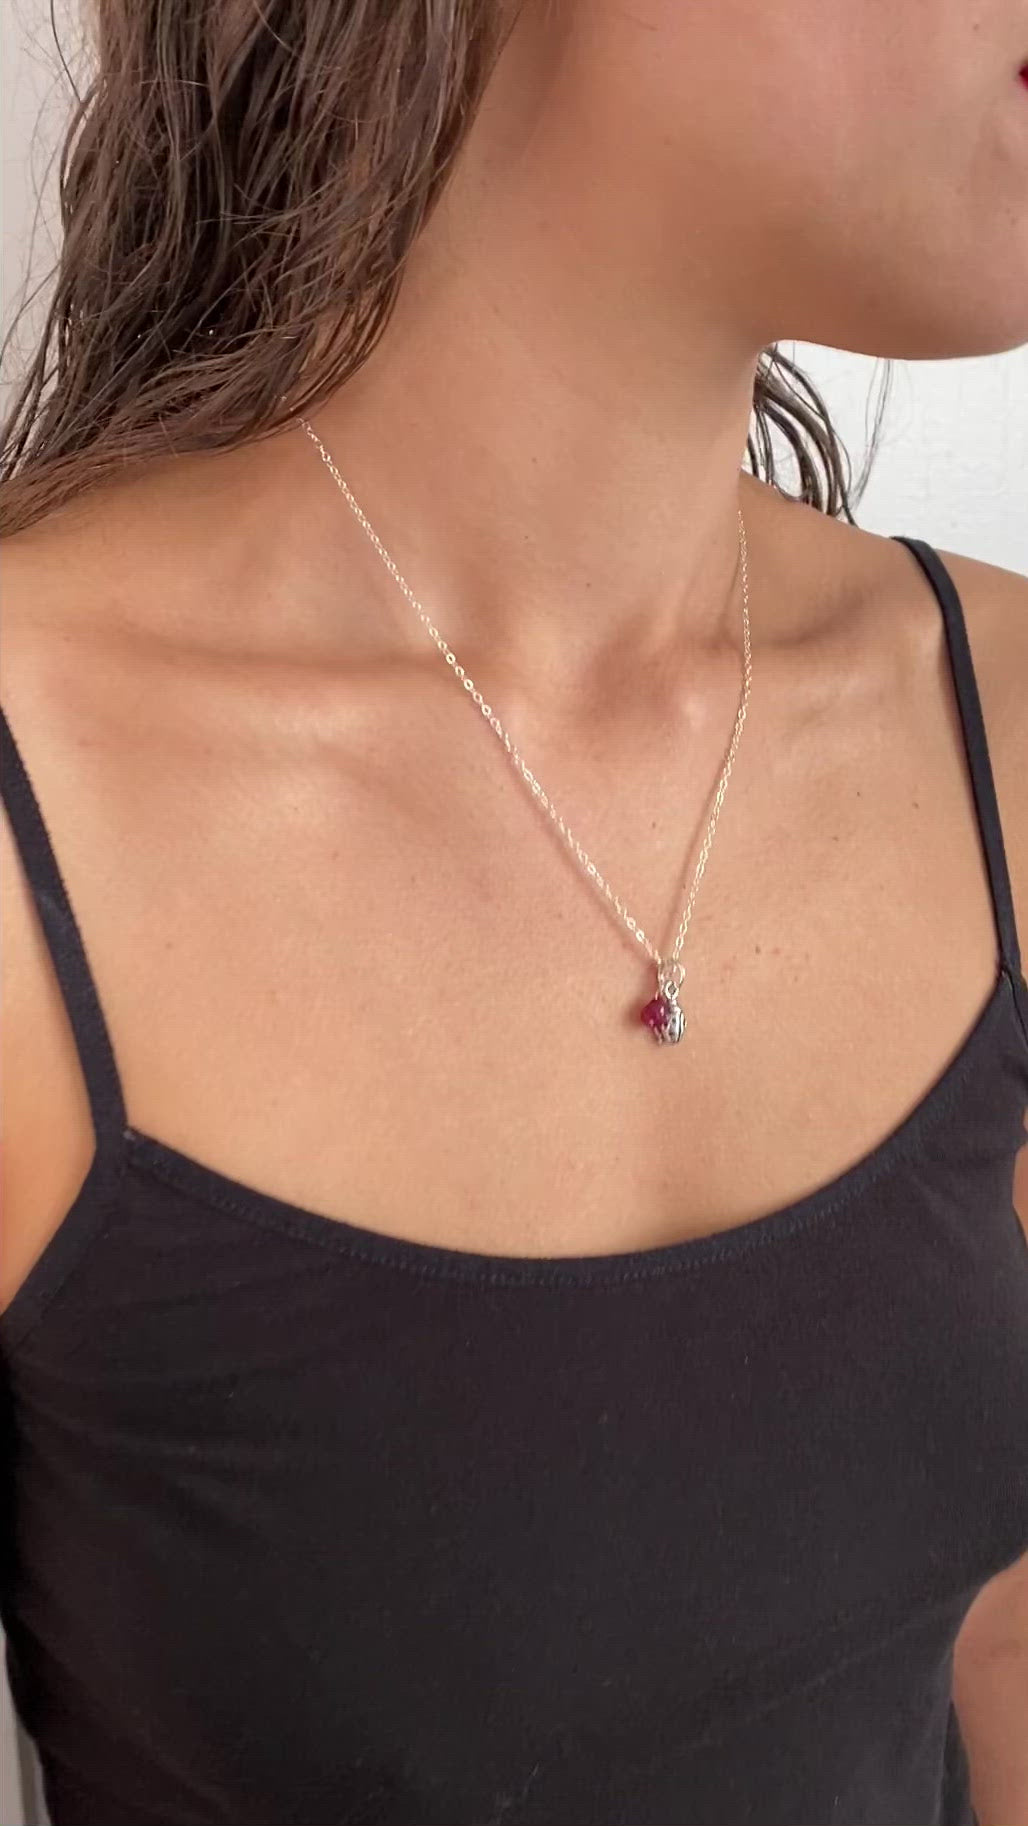 Ladybug Charm and Ruby Necklace. Genuine Ruby and Sterling Silver Necklace